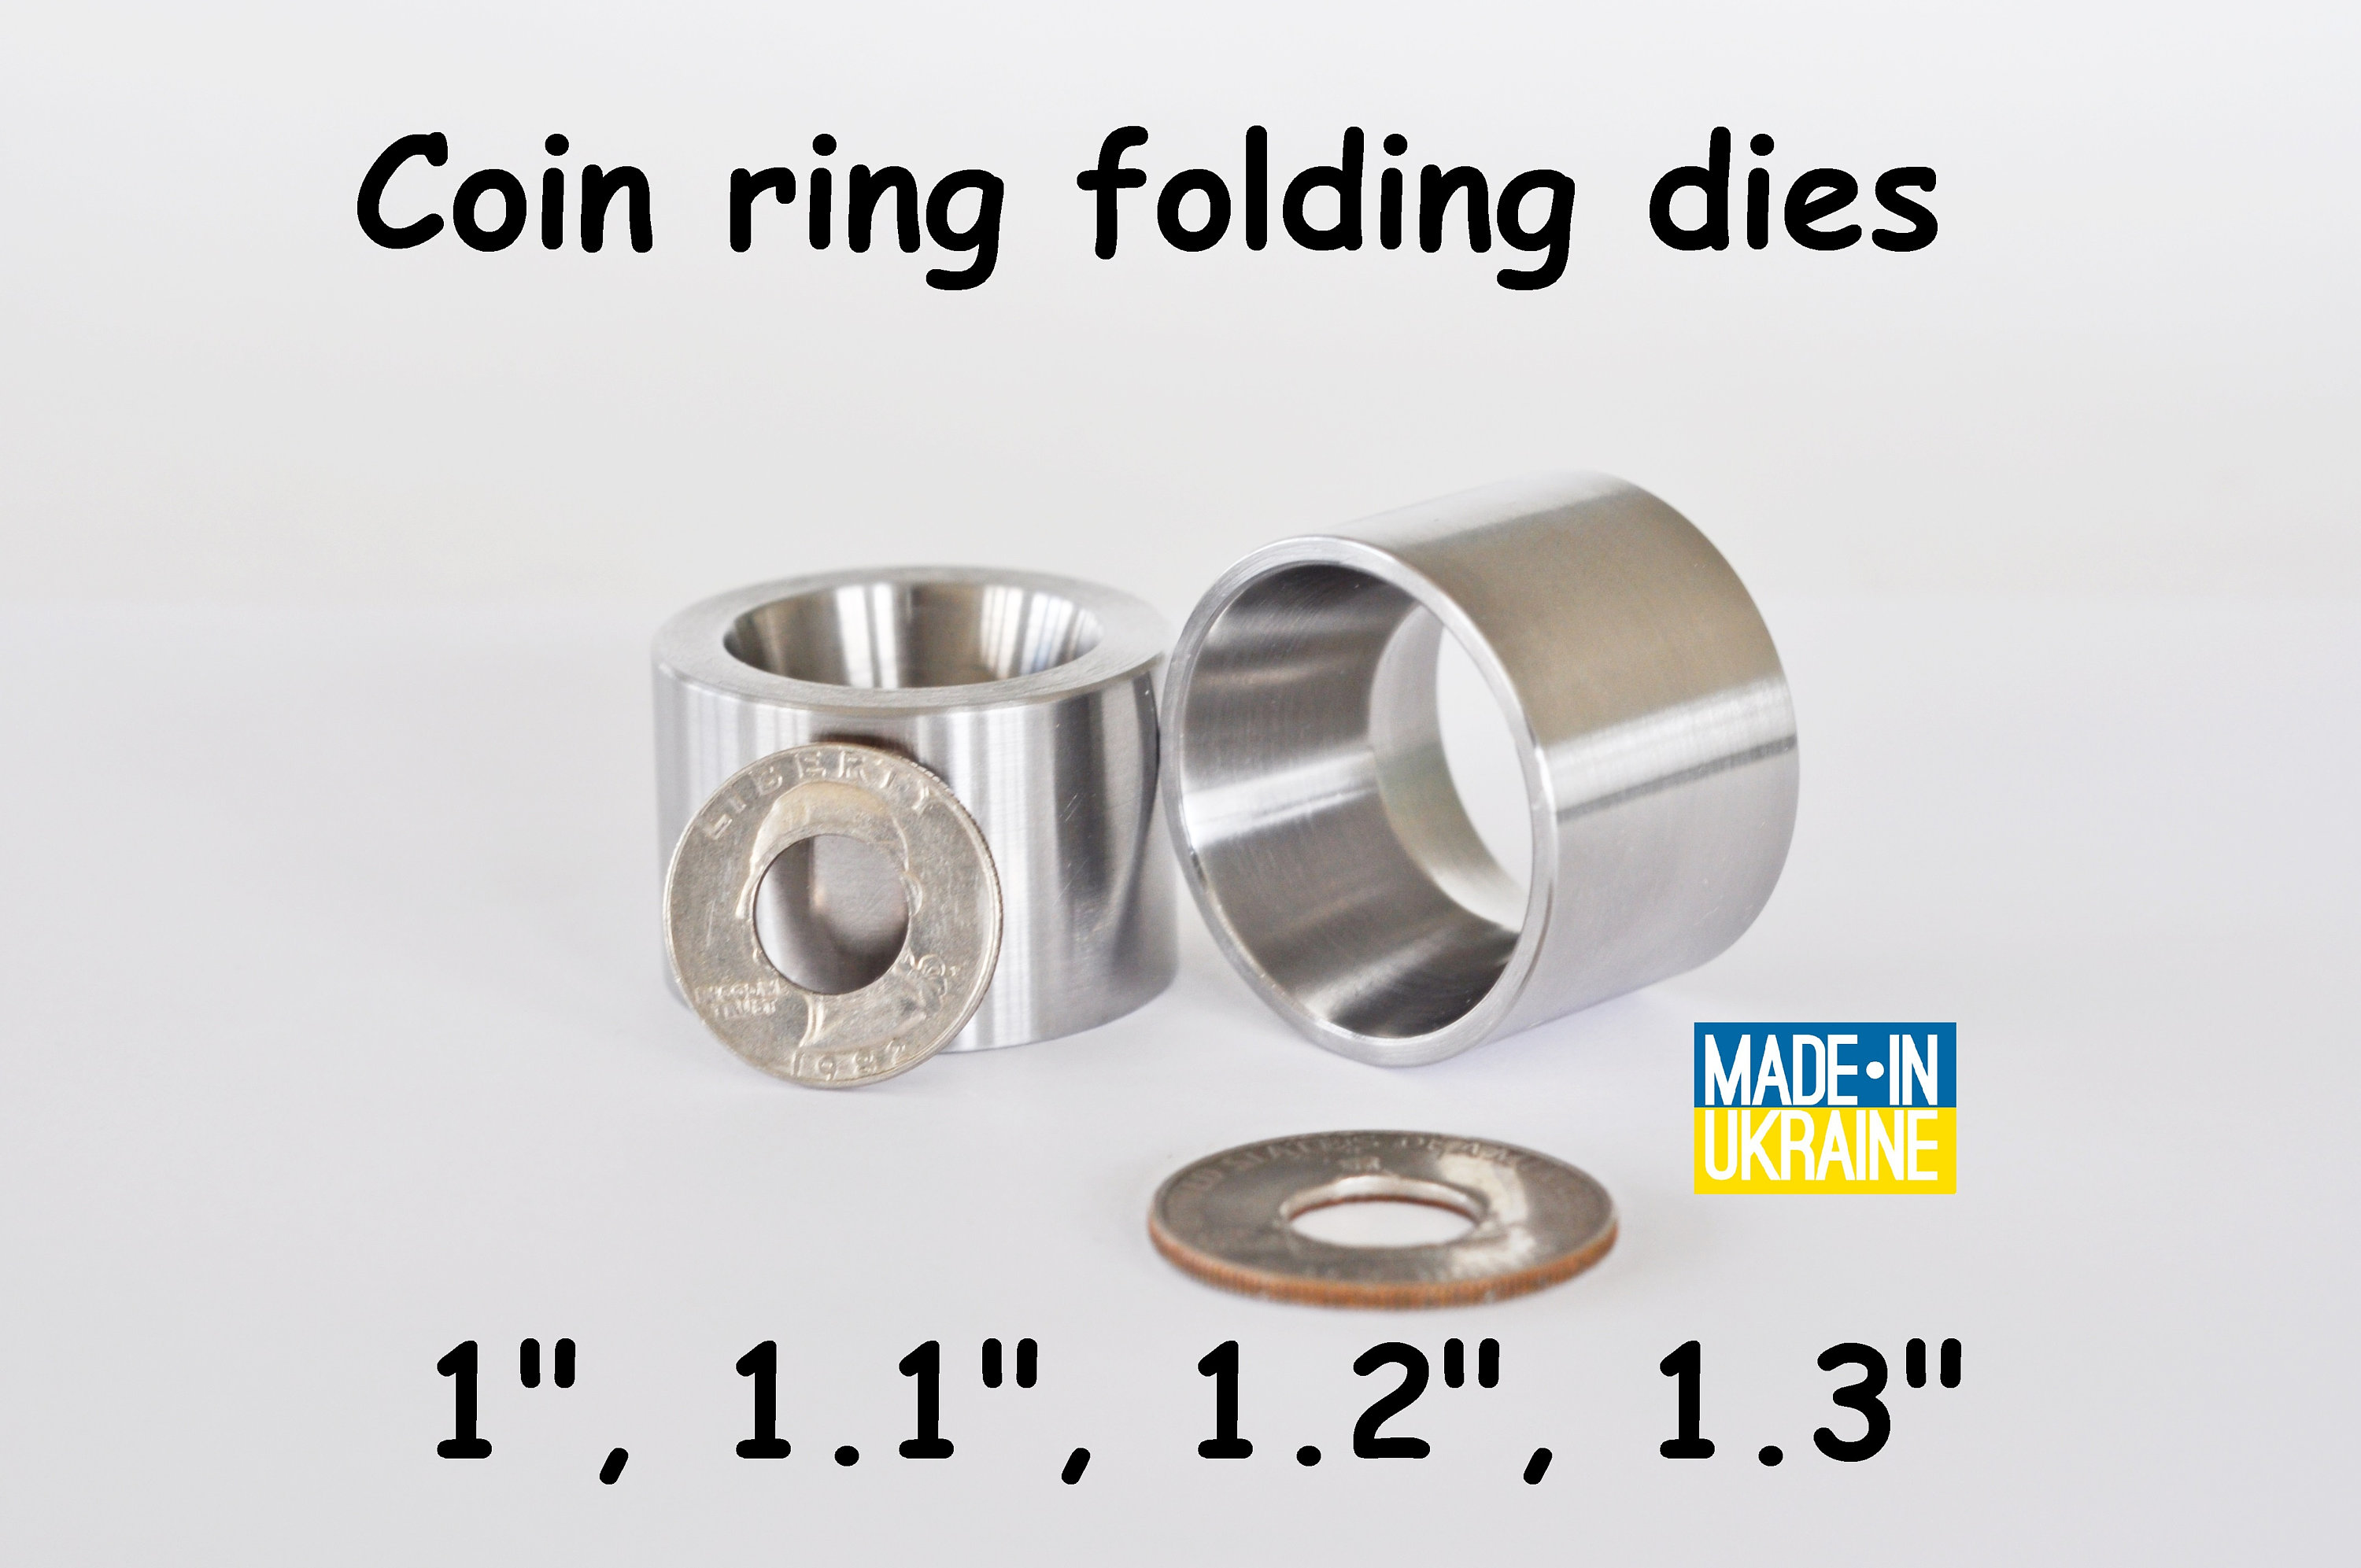 17 DEGREE Folding die (1.1″ x 1.2″) for making coin rings Stainless Steel –  Legacy Brand Coin Ring Tools